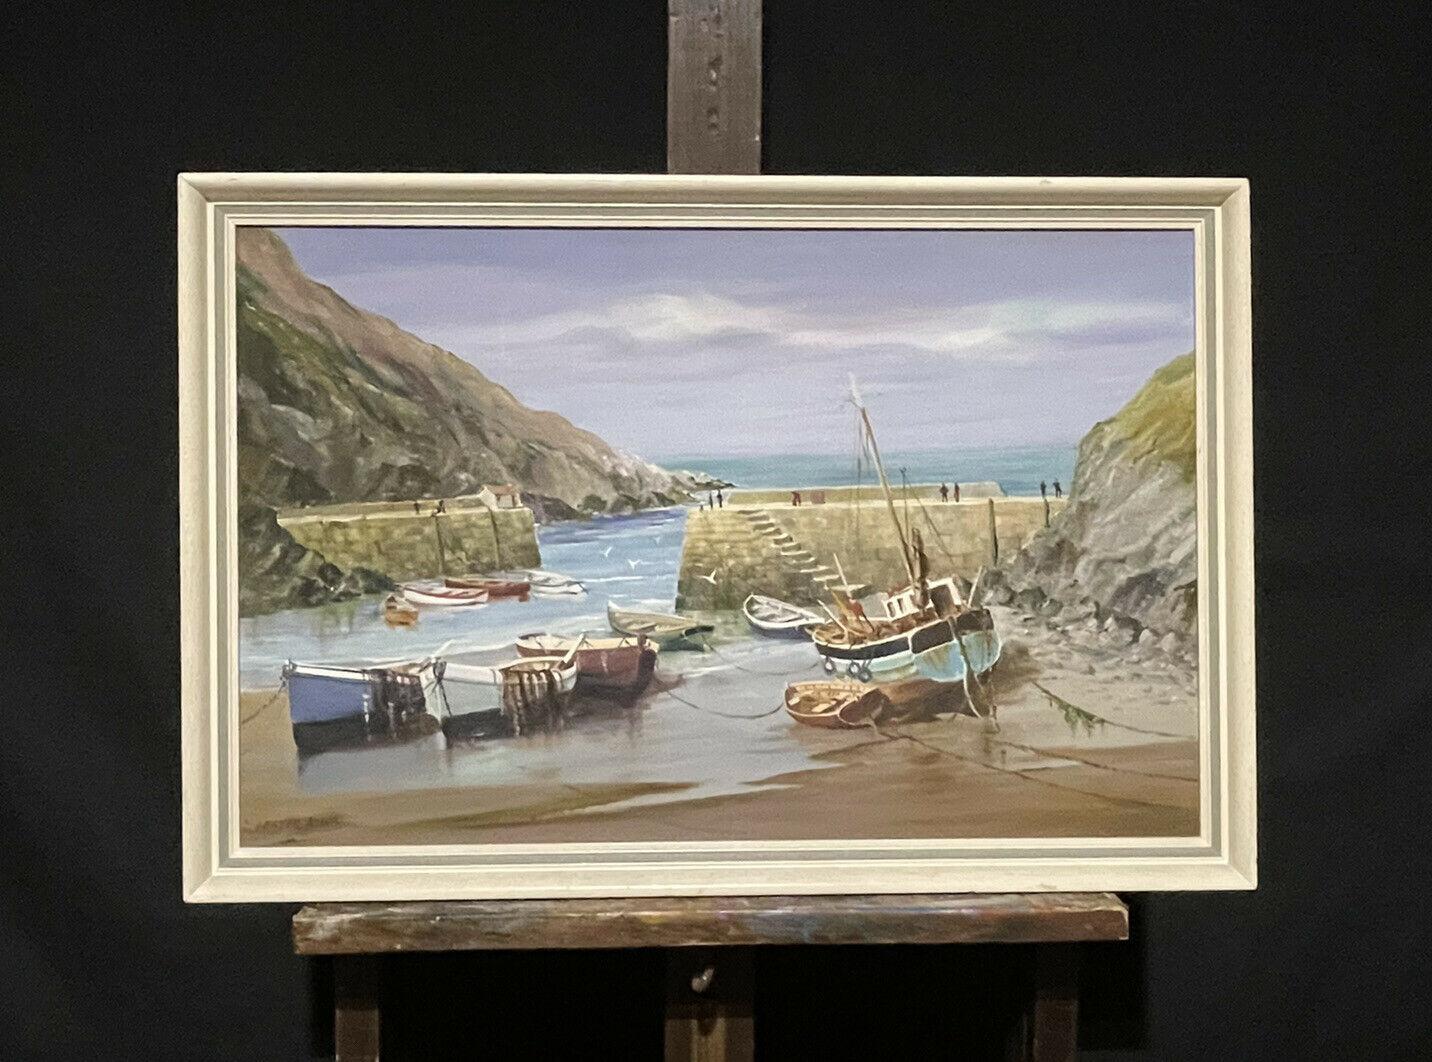 VINTAGE CORNISH FISHING HARBOR SCENE - SIGNED OIL PAINTING - Painting by Lester Atack